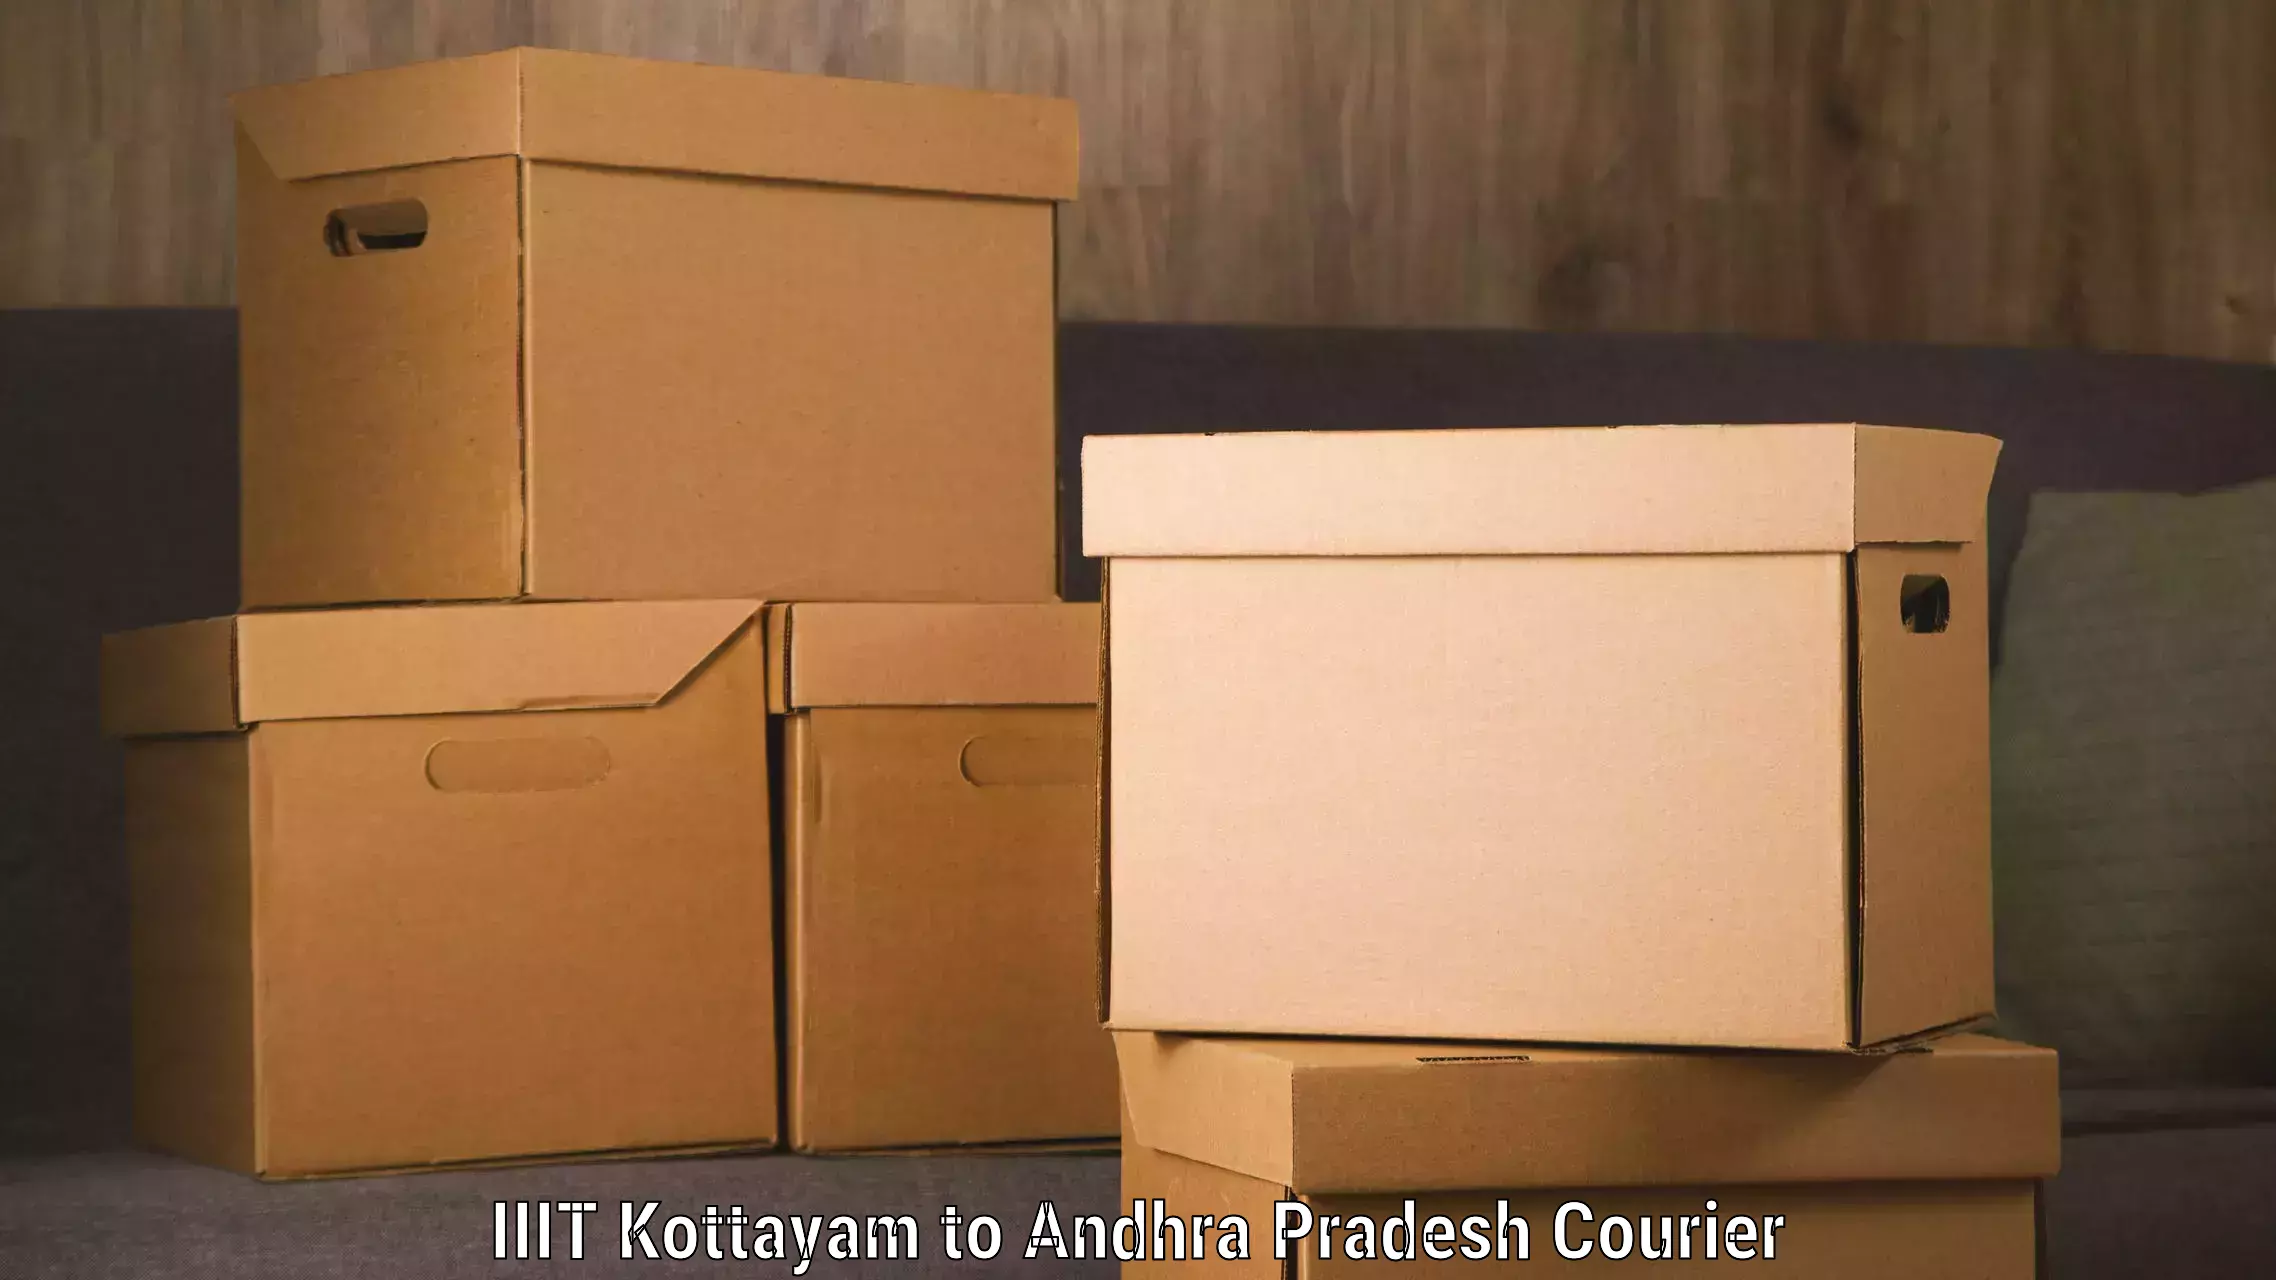 Next day courier in IIIT Kottayam to Andhra Pradesh